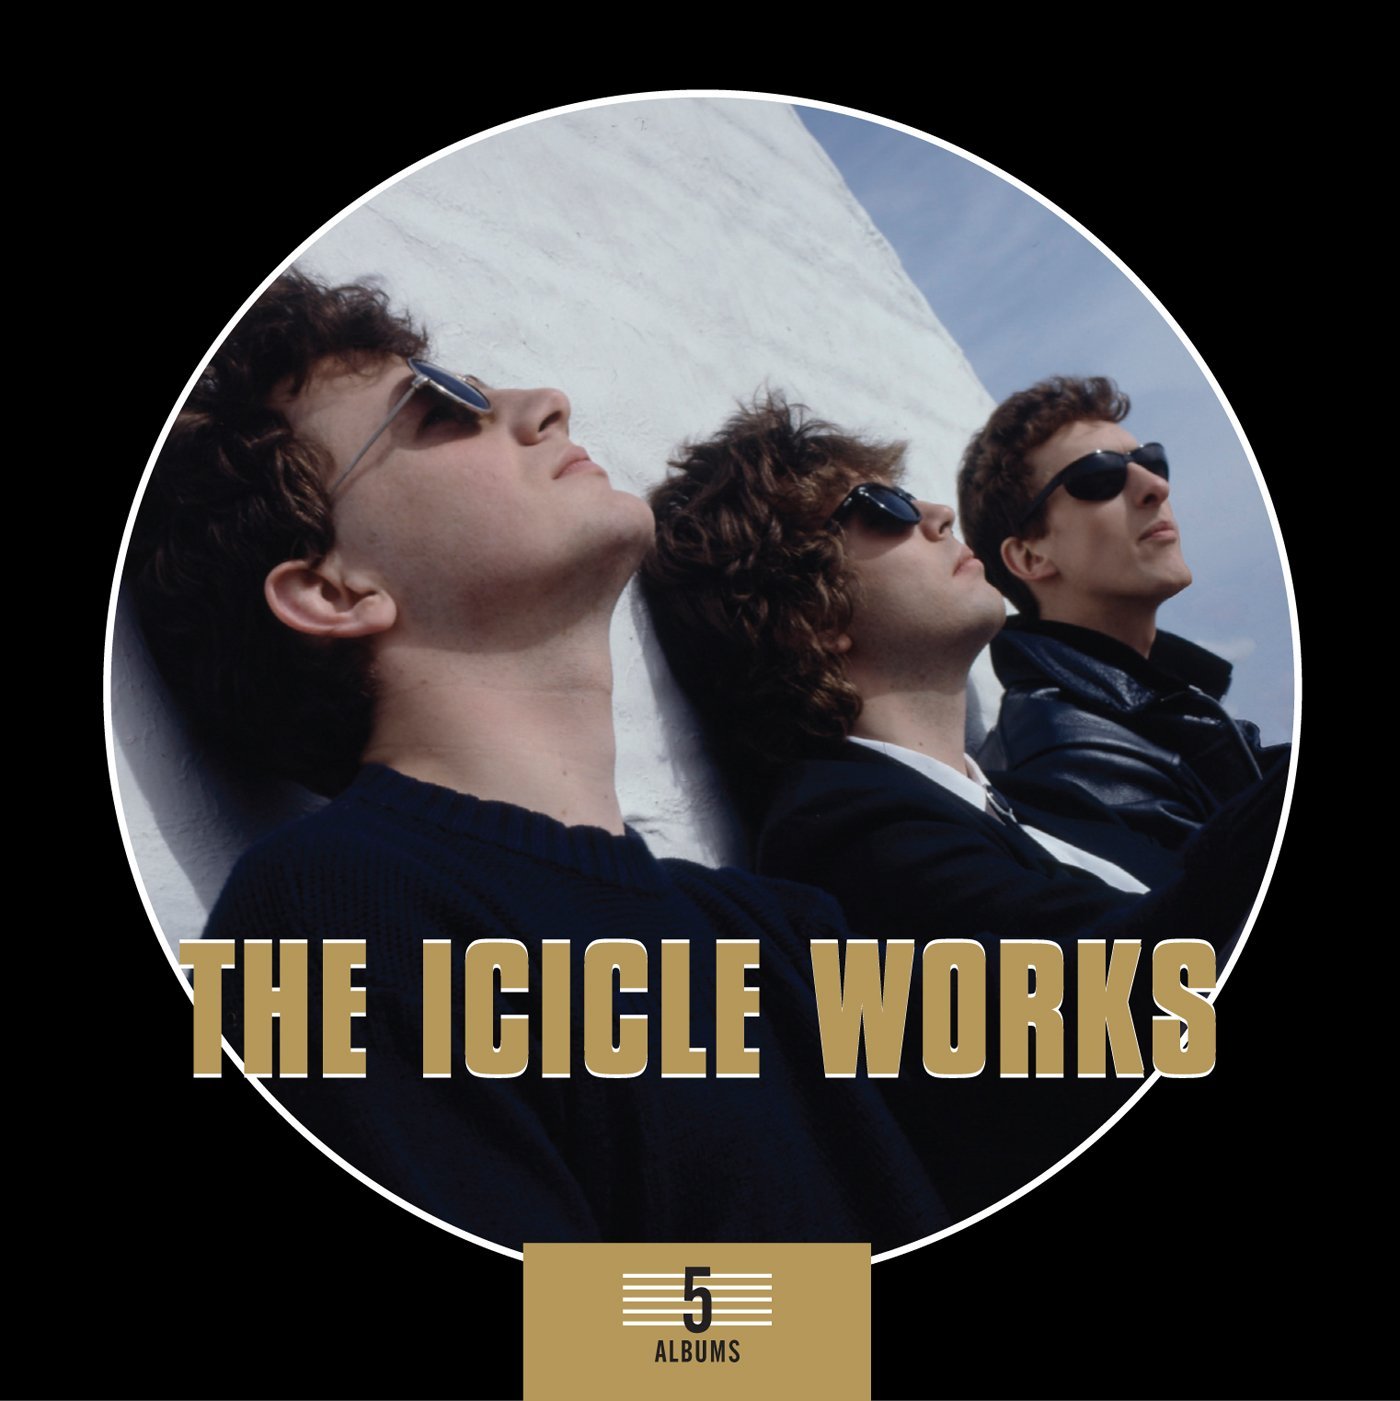 The absolute Works: The Icicle Works 5 albums box set